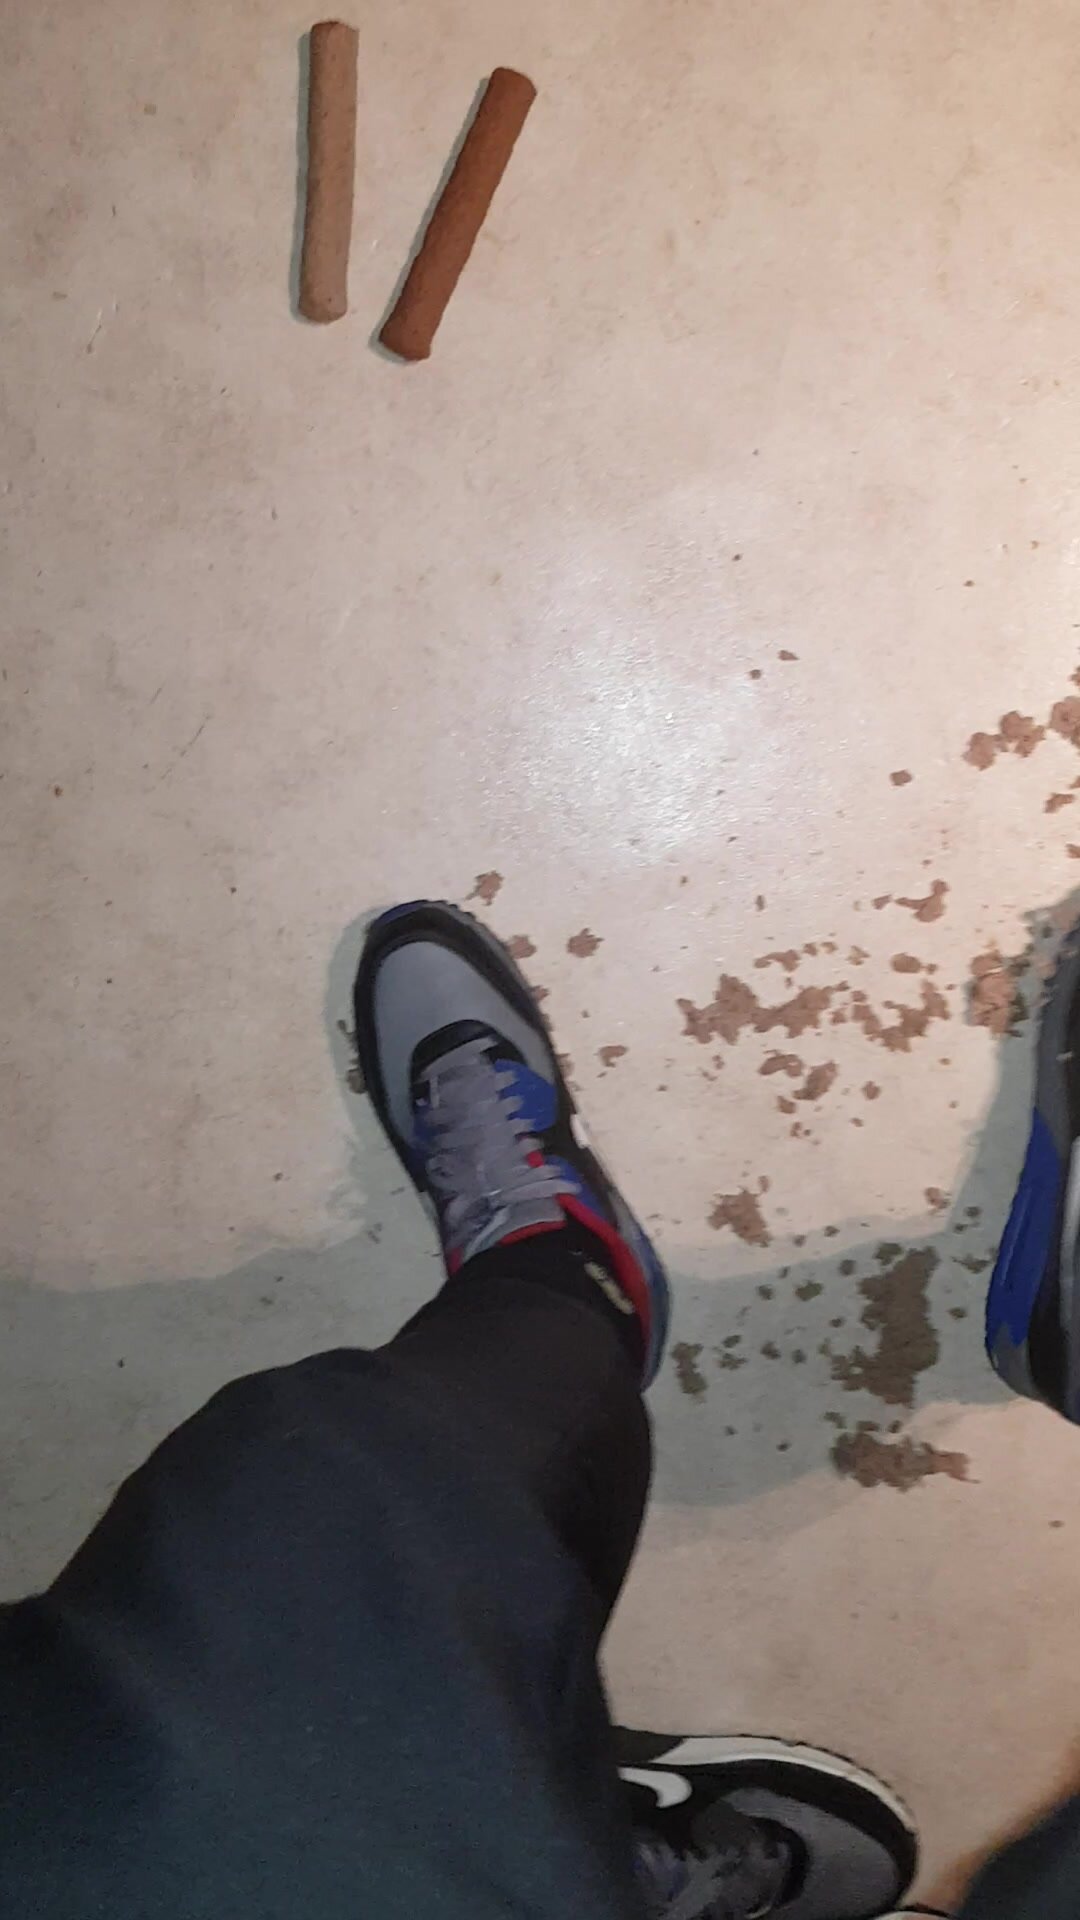 Making a mess with my Air Max 90s